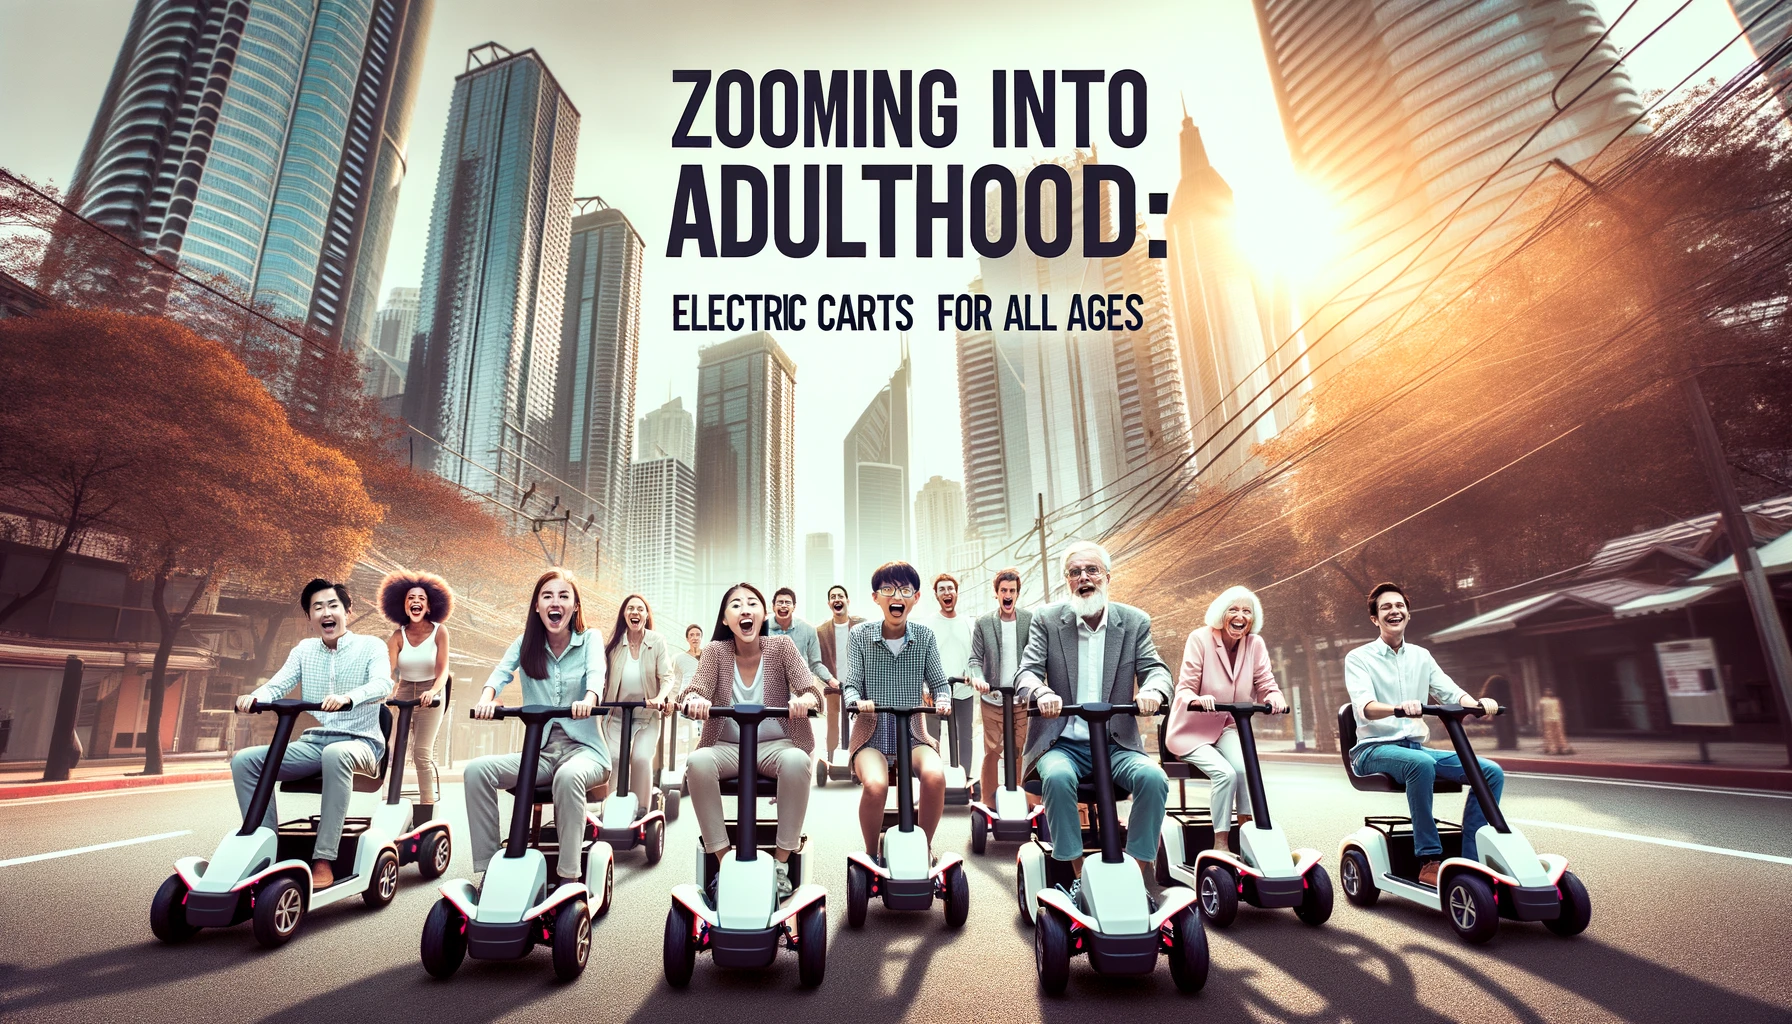 Zooming into Adulthood: Electric Carts for All Ages